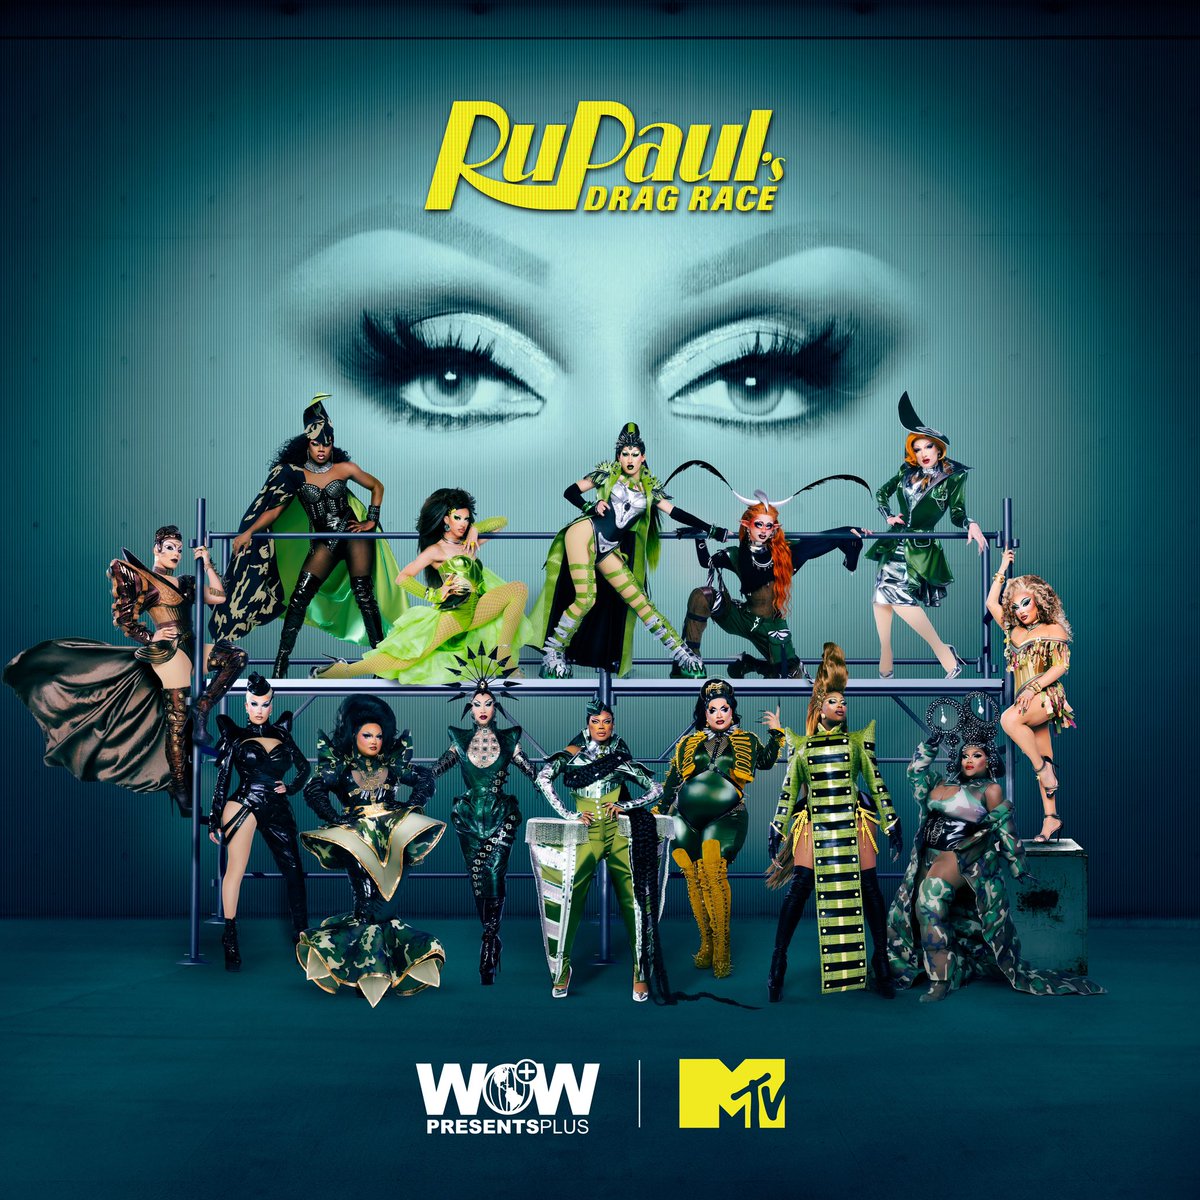 Congrats to my #DragRace Season 16 sisters! 💗 I'm seated for the premiere on Jan 5 at 8PM ET on @mtv in the USA and on @wowpresentsplus worldwide ex. USA, Canada, Australia (first episode streams free!) 🏁